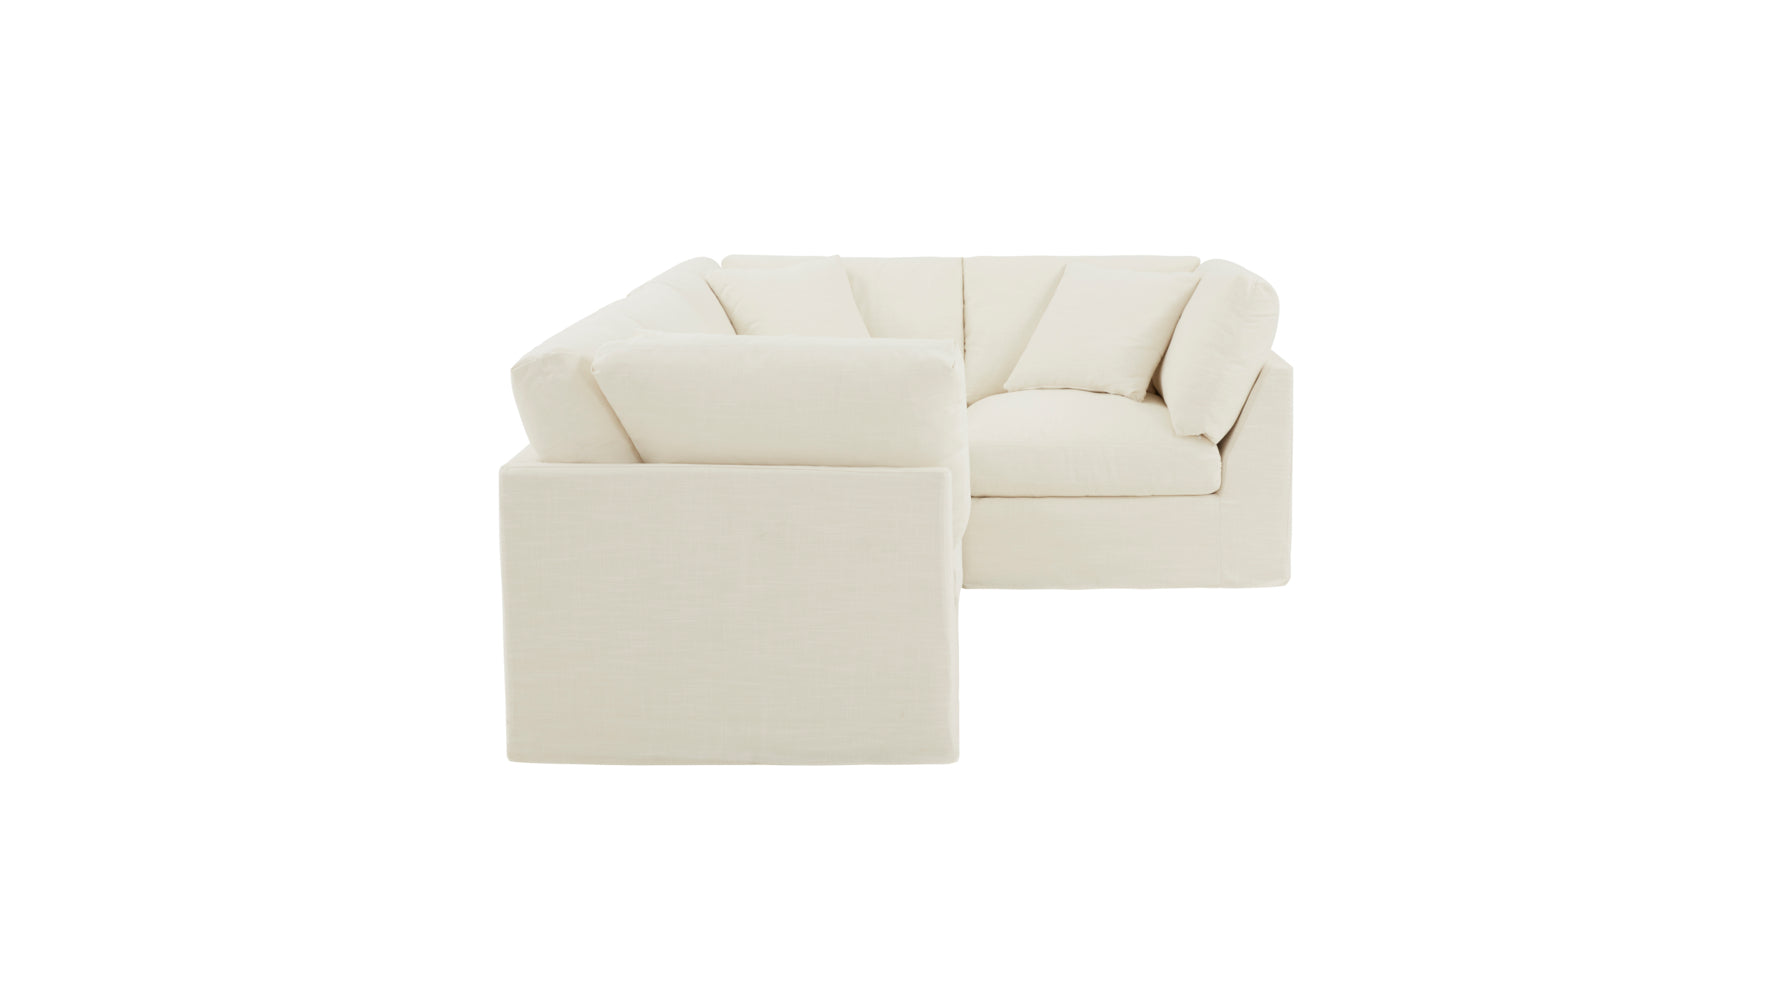 Get Together™ 4-Piece Modular Sectional Closed, Standard, Cream Linen - Image 6